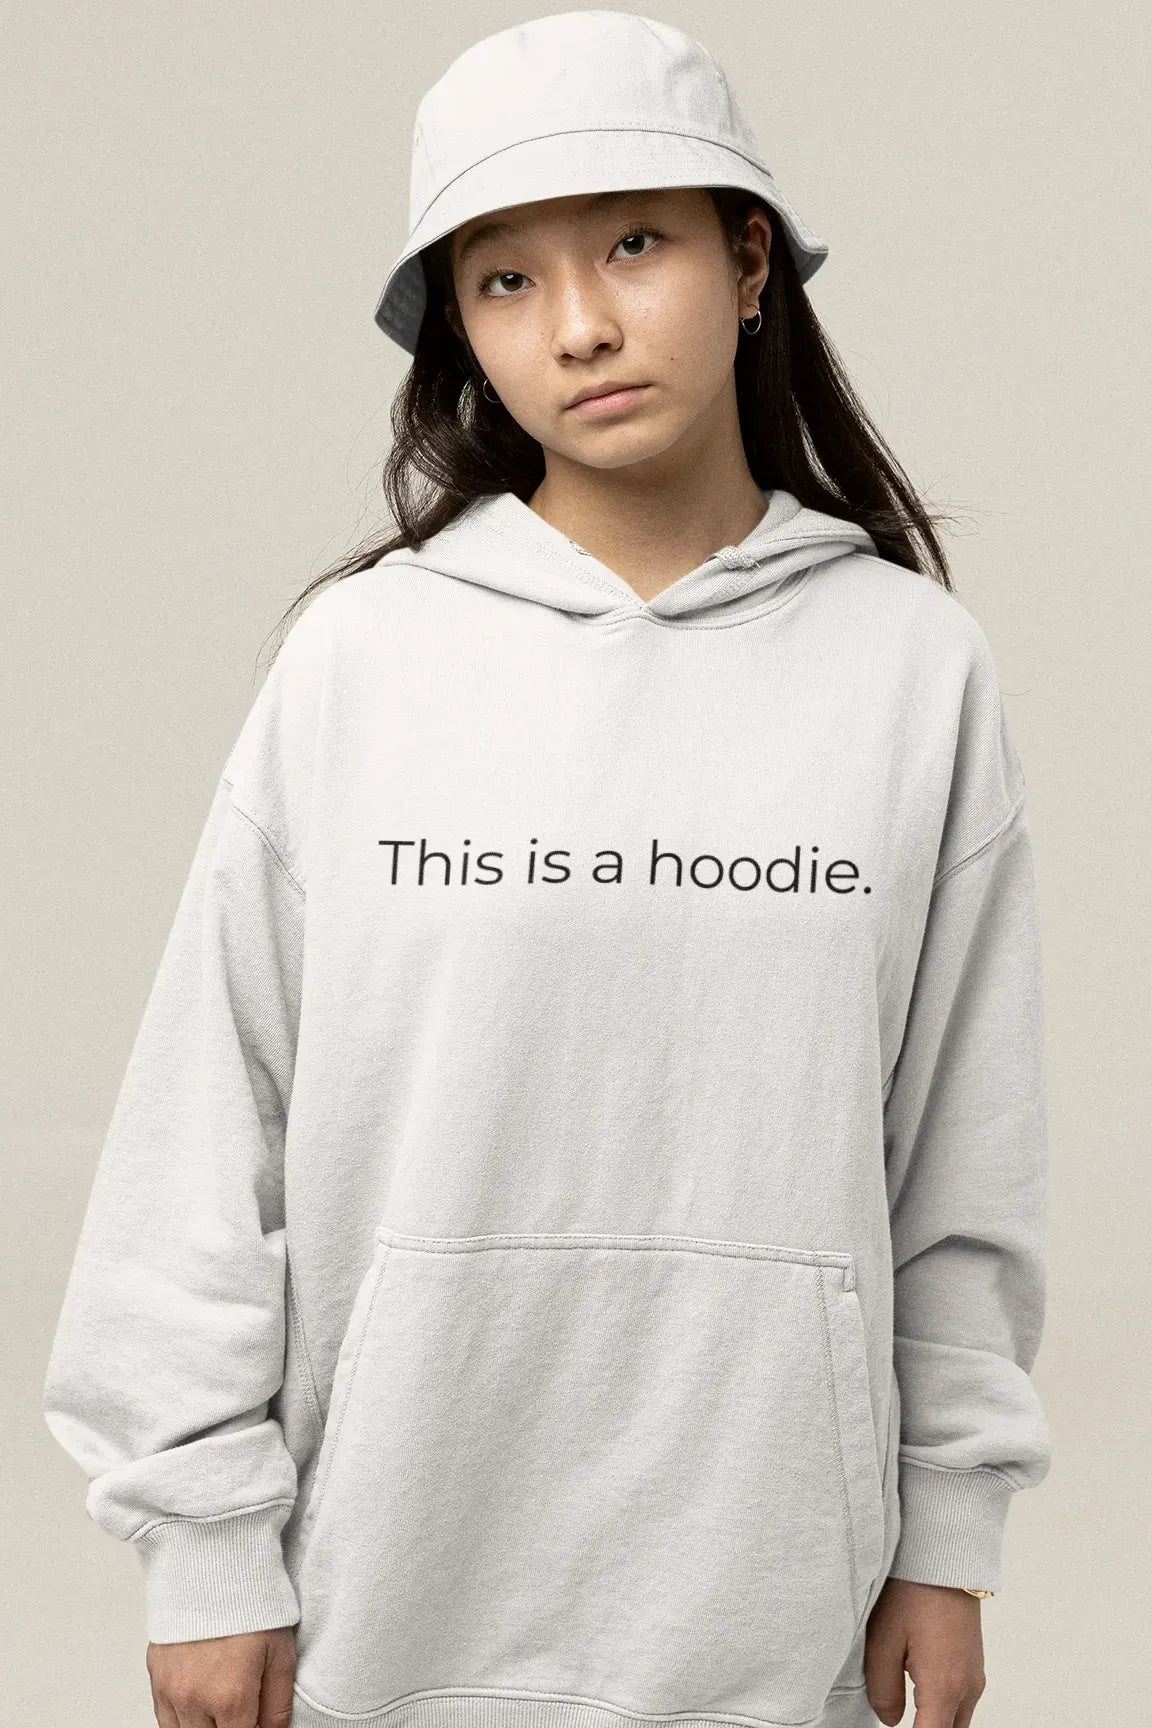 A teenage girl wearing a bucket hat and a hoodie with 'This is a hoodie.' on it.